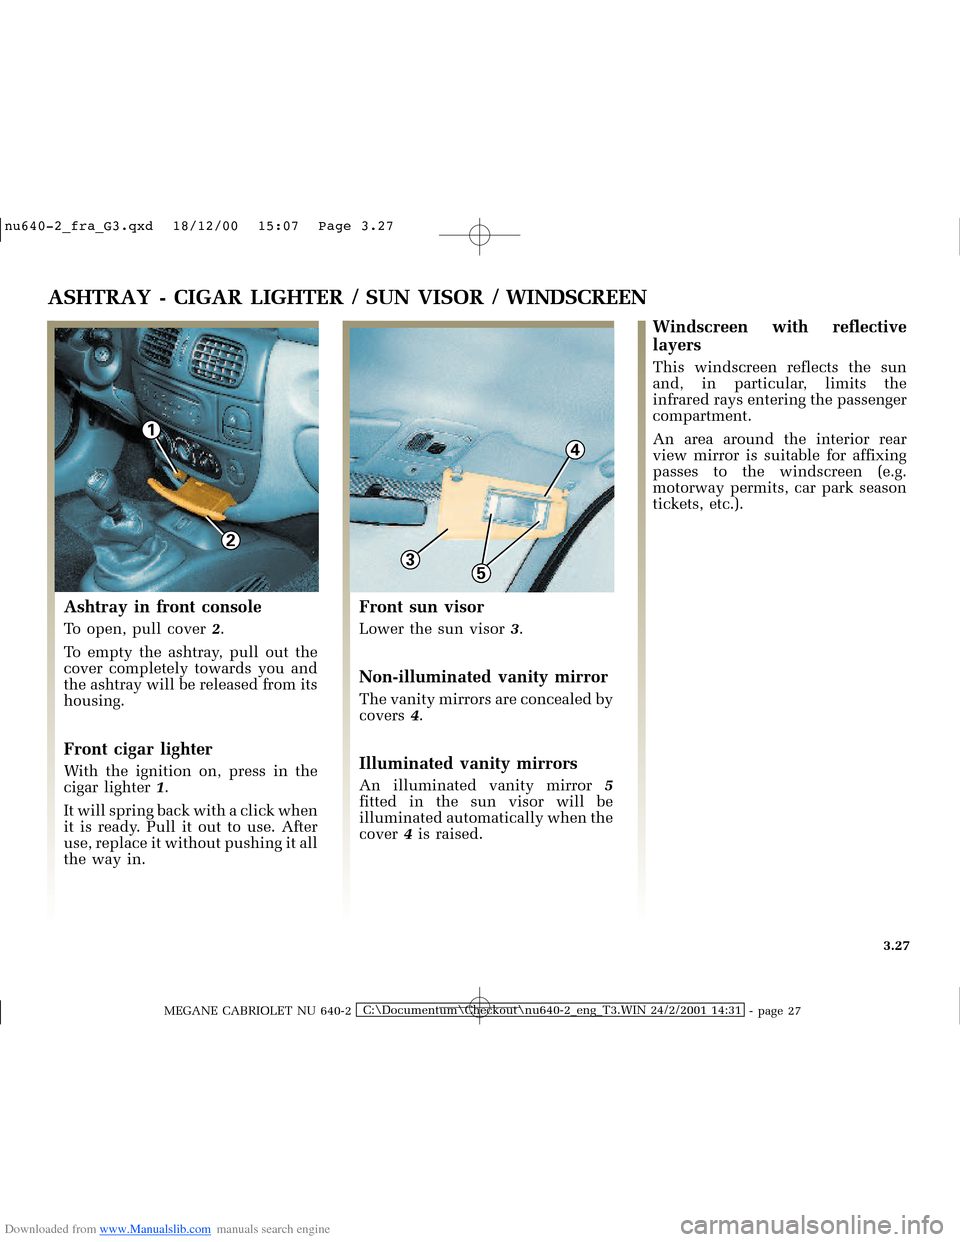 RENAULT MEGANE 2000 X64 / 1.G Owners Manual Downloaded from www.Manualslib.com manuals search engine 4
3
1
2
5
�Q�X������B�I�U�D�B�*���T�[�G� � ��������� � ������ � �3�D�J�H� ����
MEGANE CABRIOLET NU 640-2C:\Docum